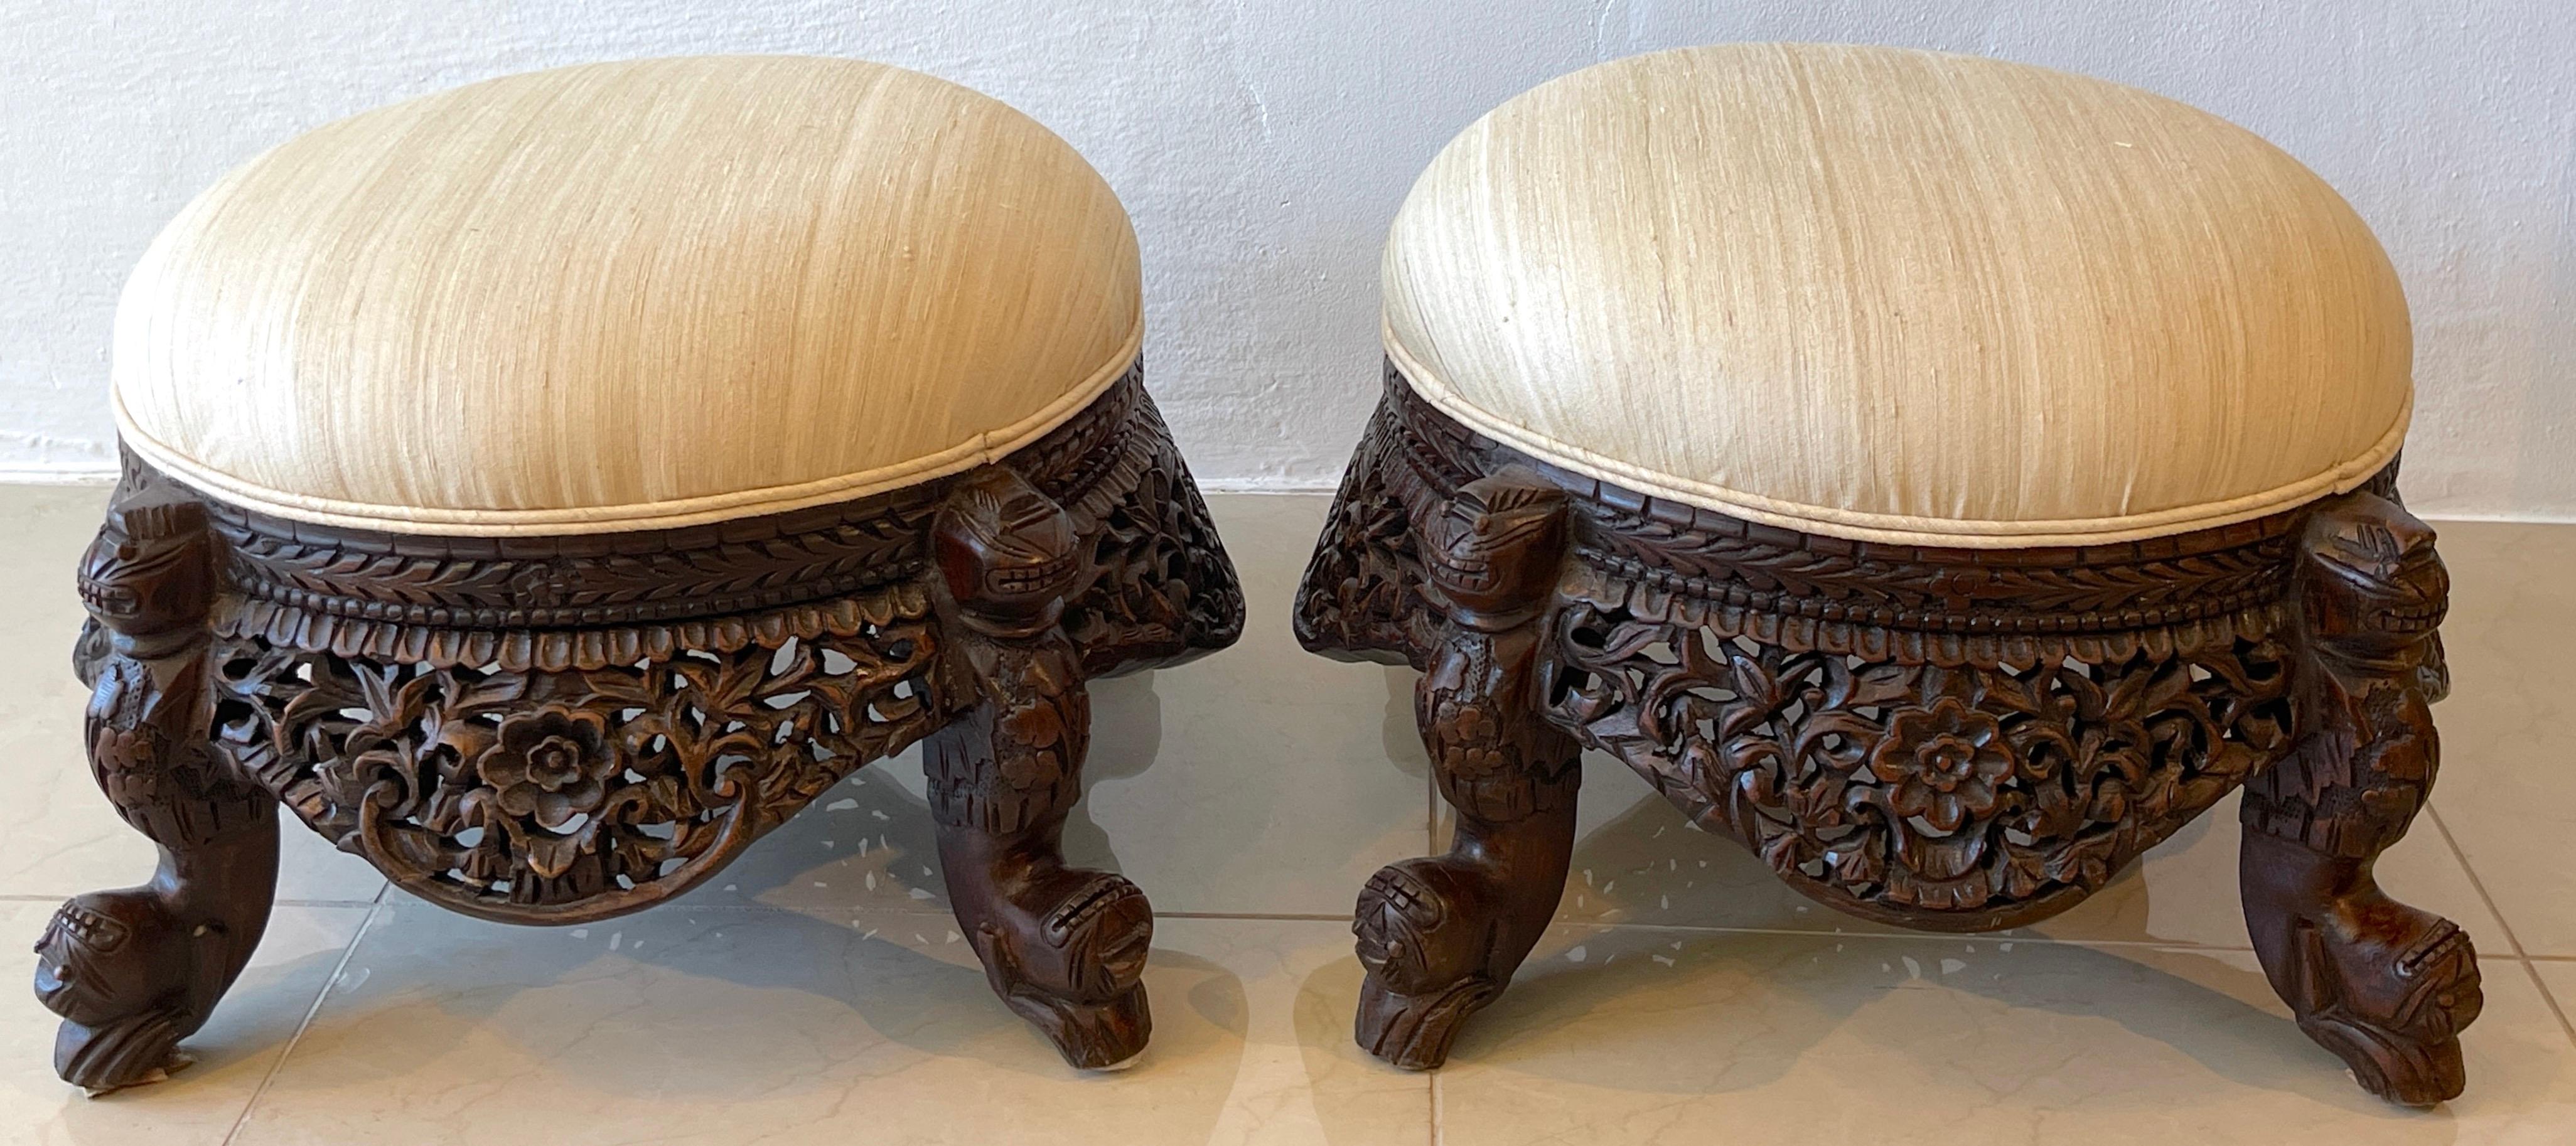 Pair of 19th century Anglo-Indian carved footstools 
Each one with exceptional pierced figural carving, with newly upholstered cushions in a subtle neutral stripped silk. Raised on four figural caryatid splay legs.
The diameter of the top cushion